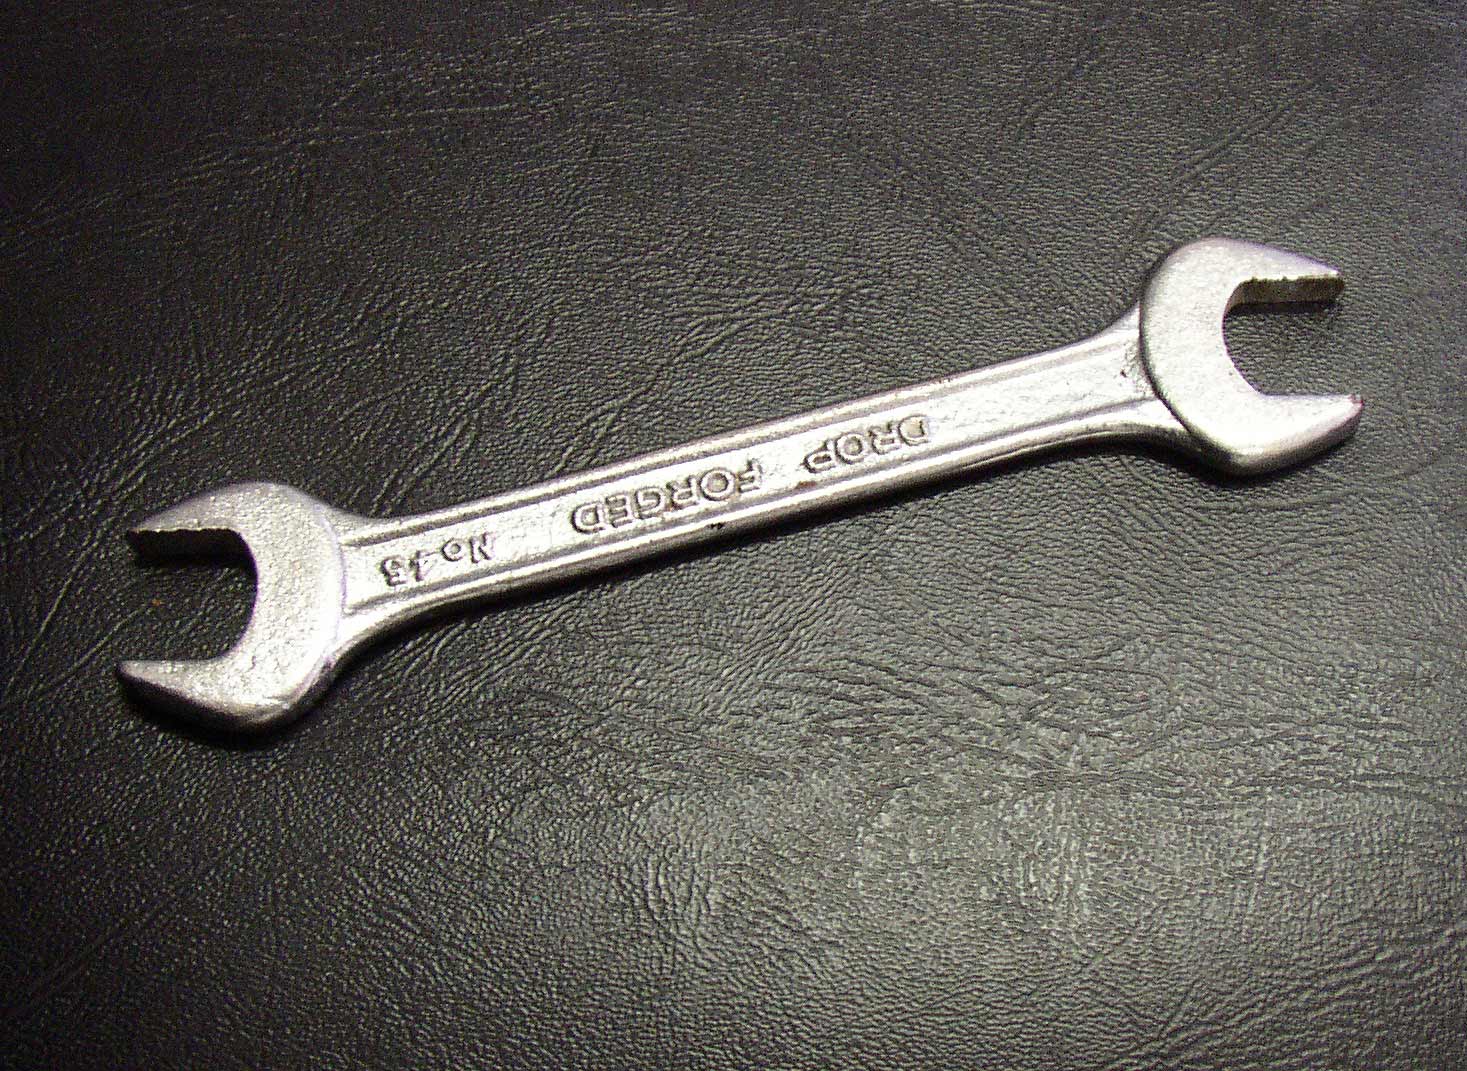 the wrench has an inscription written on it